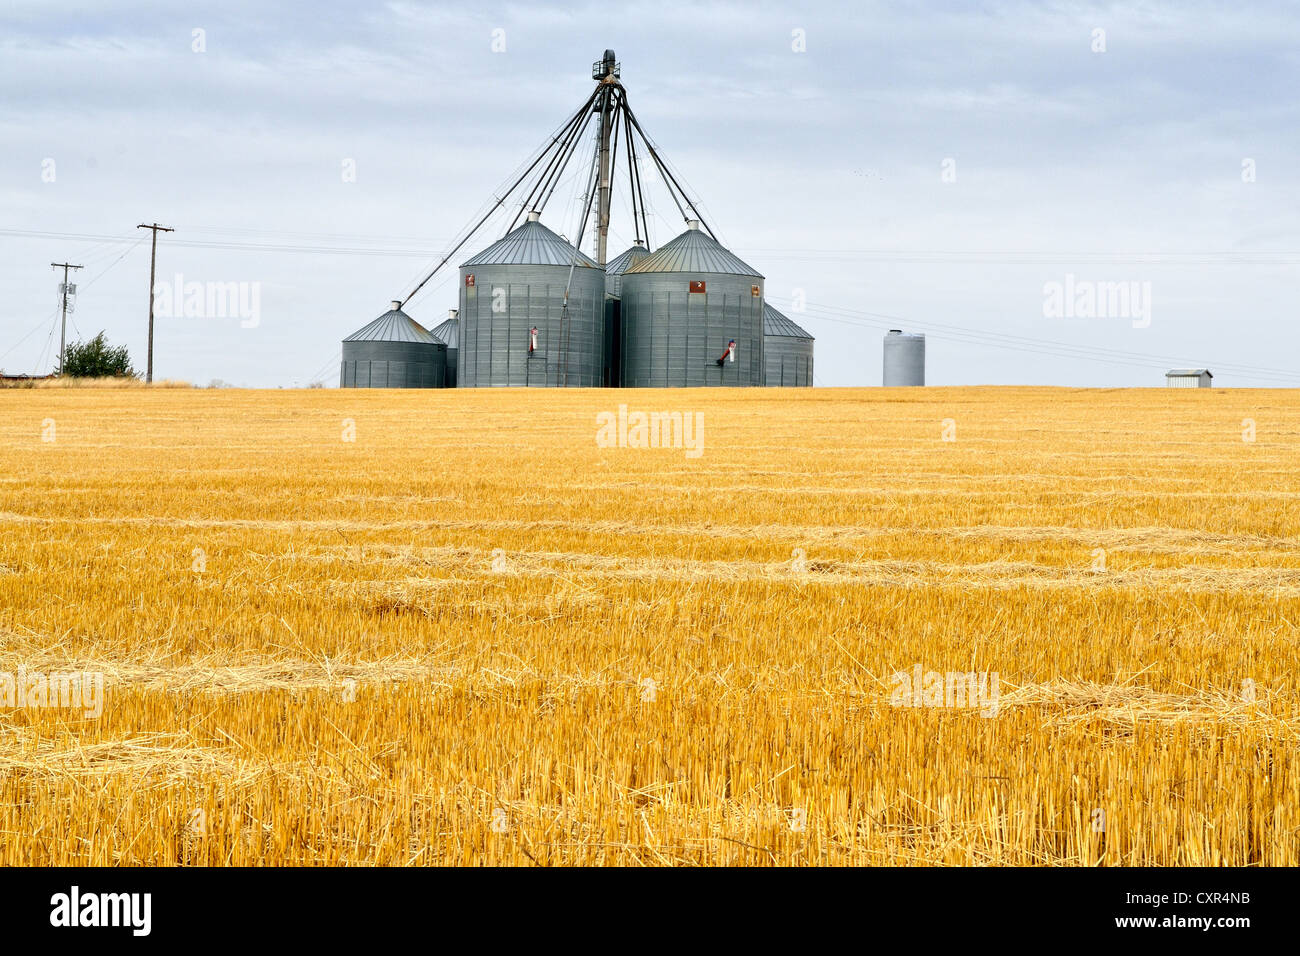 Grain silos and harvested field by combine harvesters near Moscow, Highway 95, Idaho, USA Stock Photo